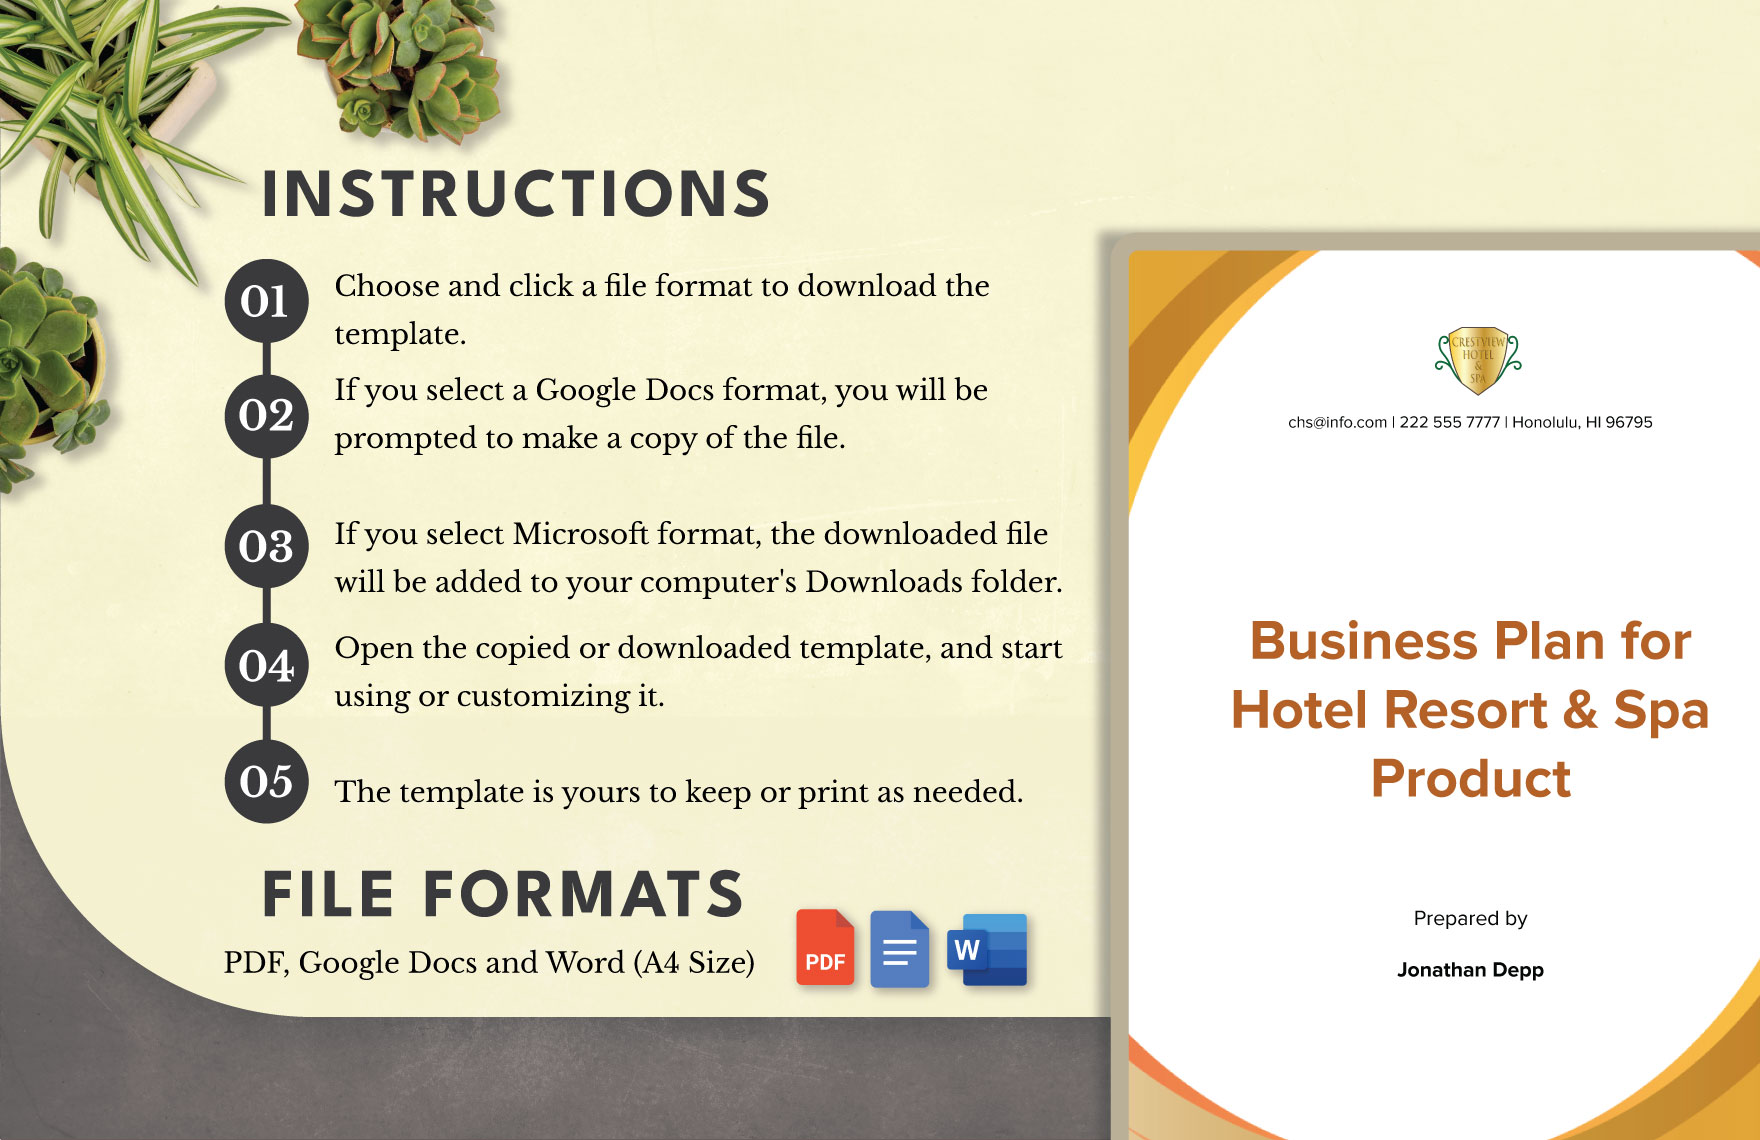 Business Plan for Hotel Resort & Spa Product Template